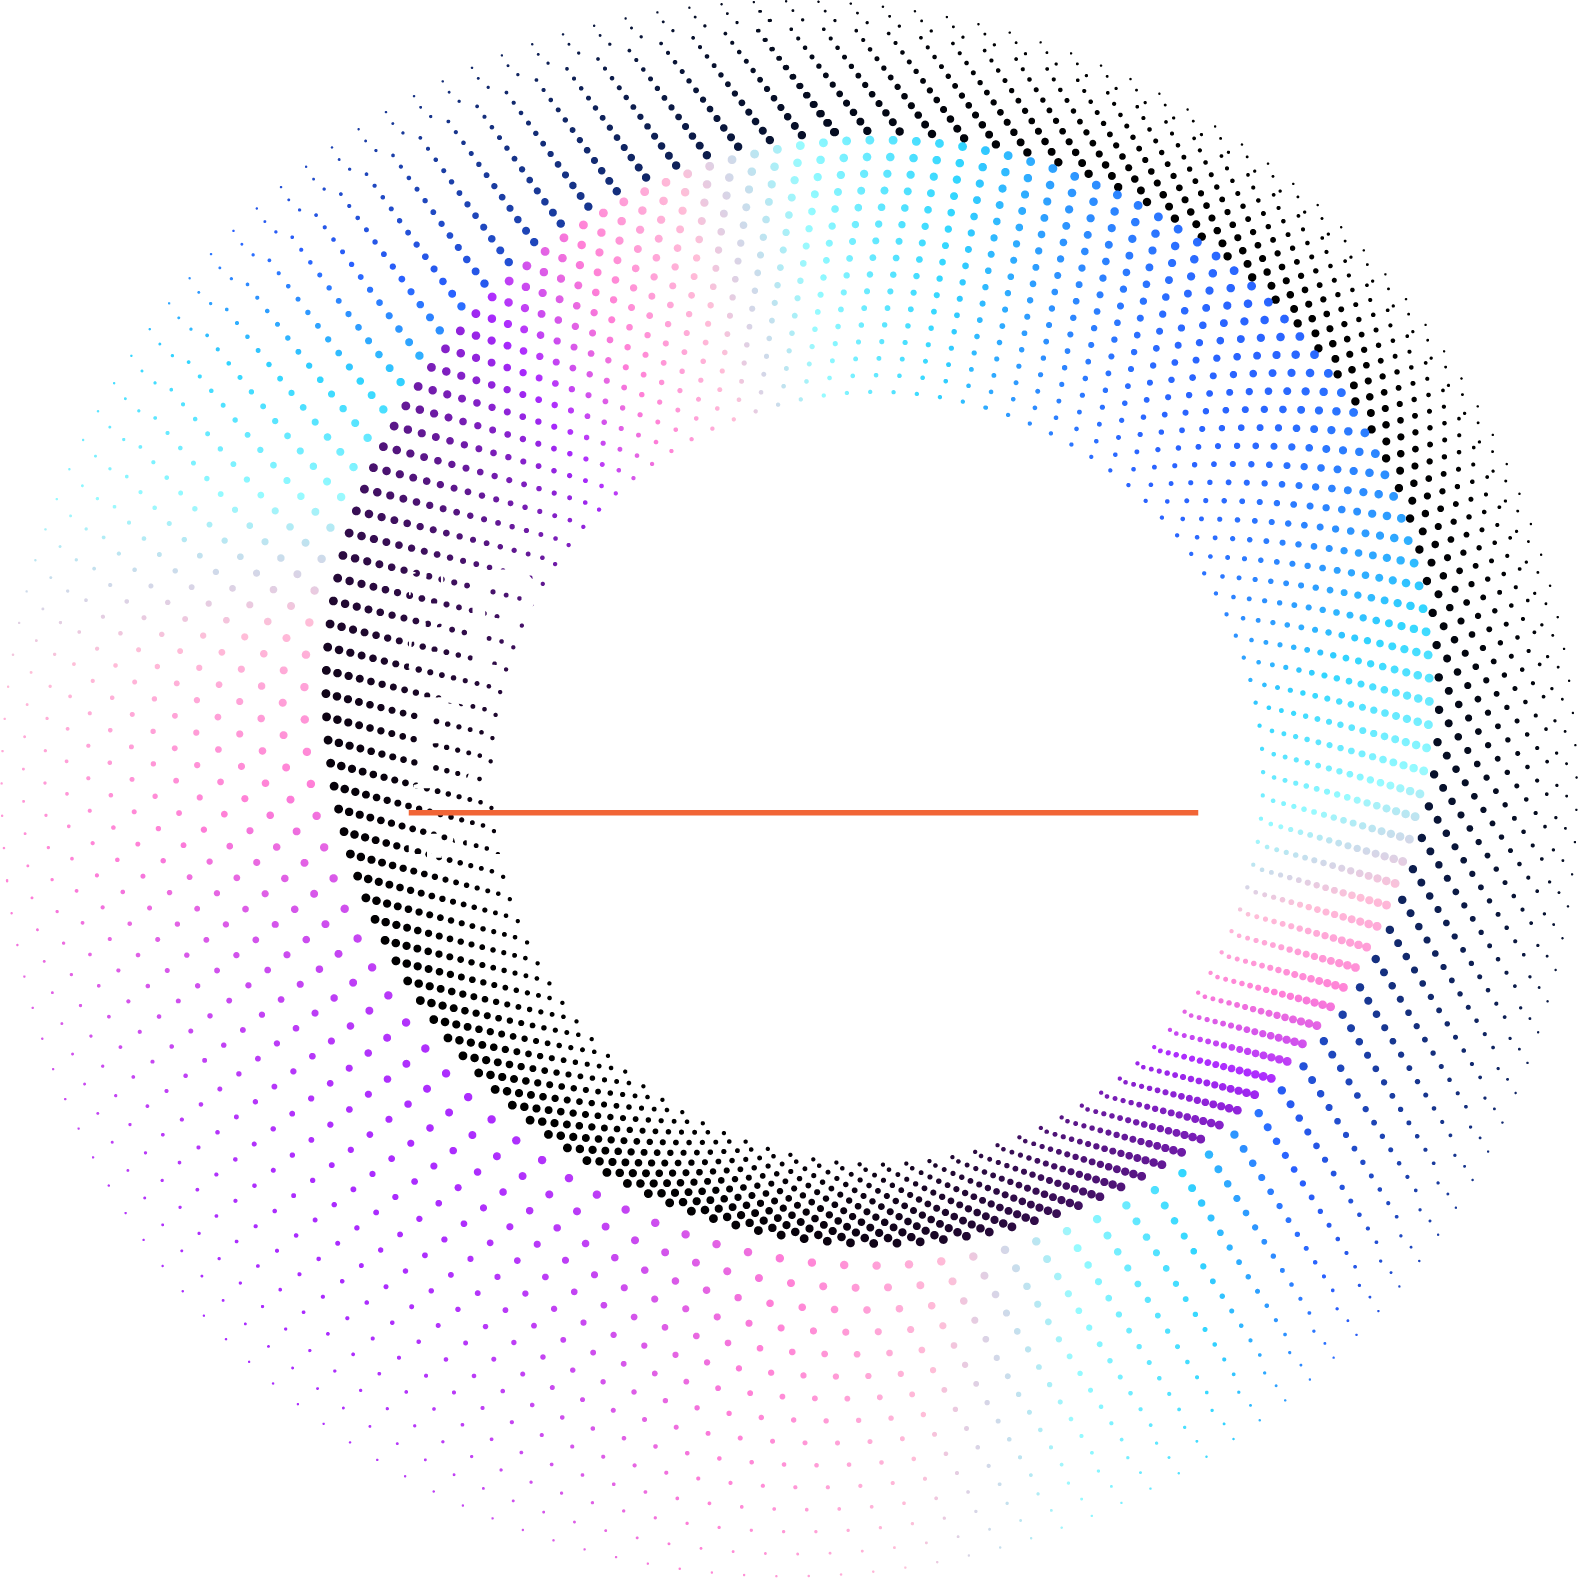 The Pinnacle Experience